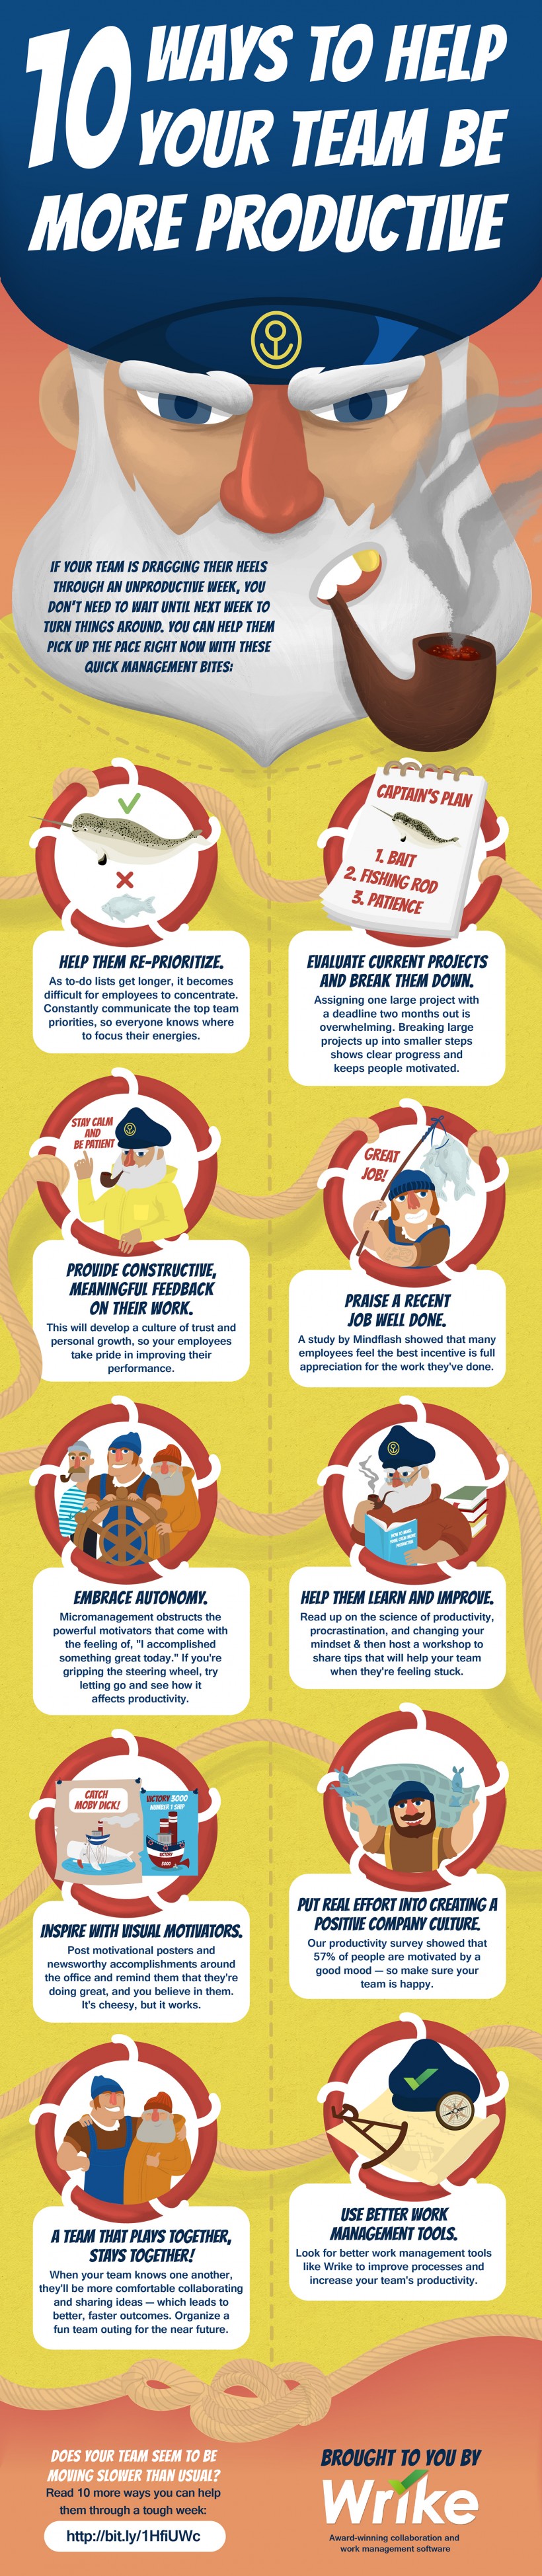 10 Ways to Make Your Team More Productive (#Infographic)